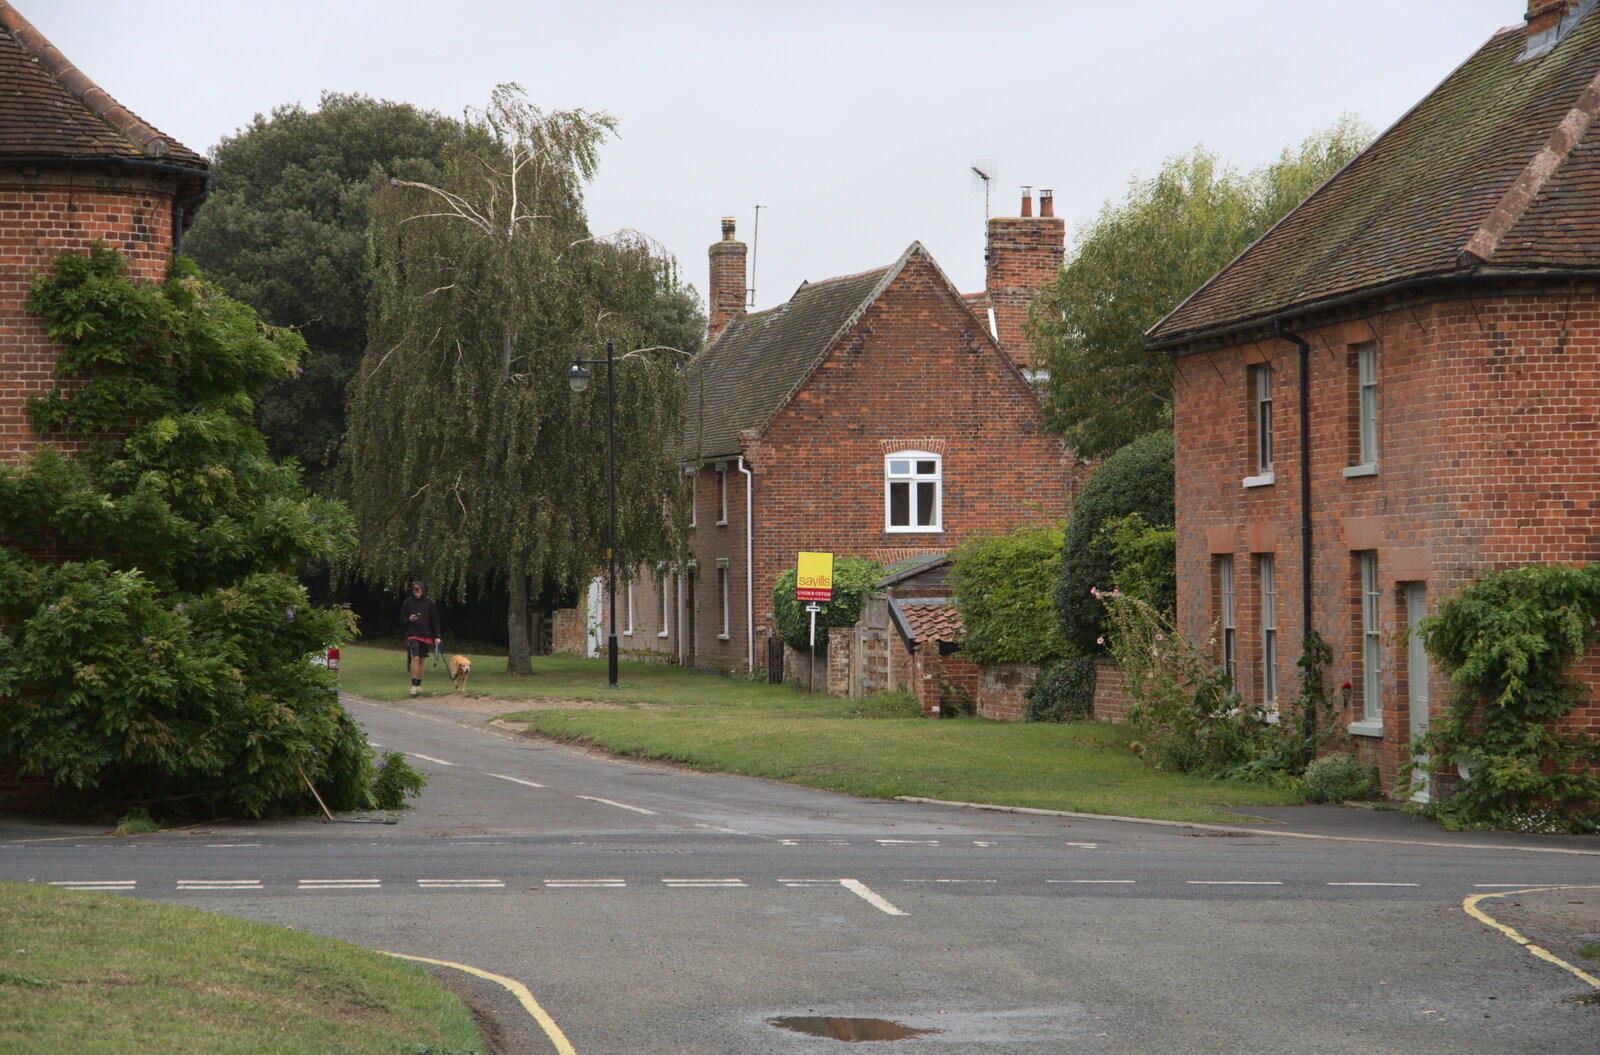 Nice brick buildings by the crossroads from A Trip to Orford, Suffolk - 29th August 2020